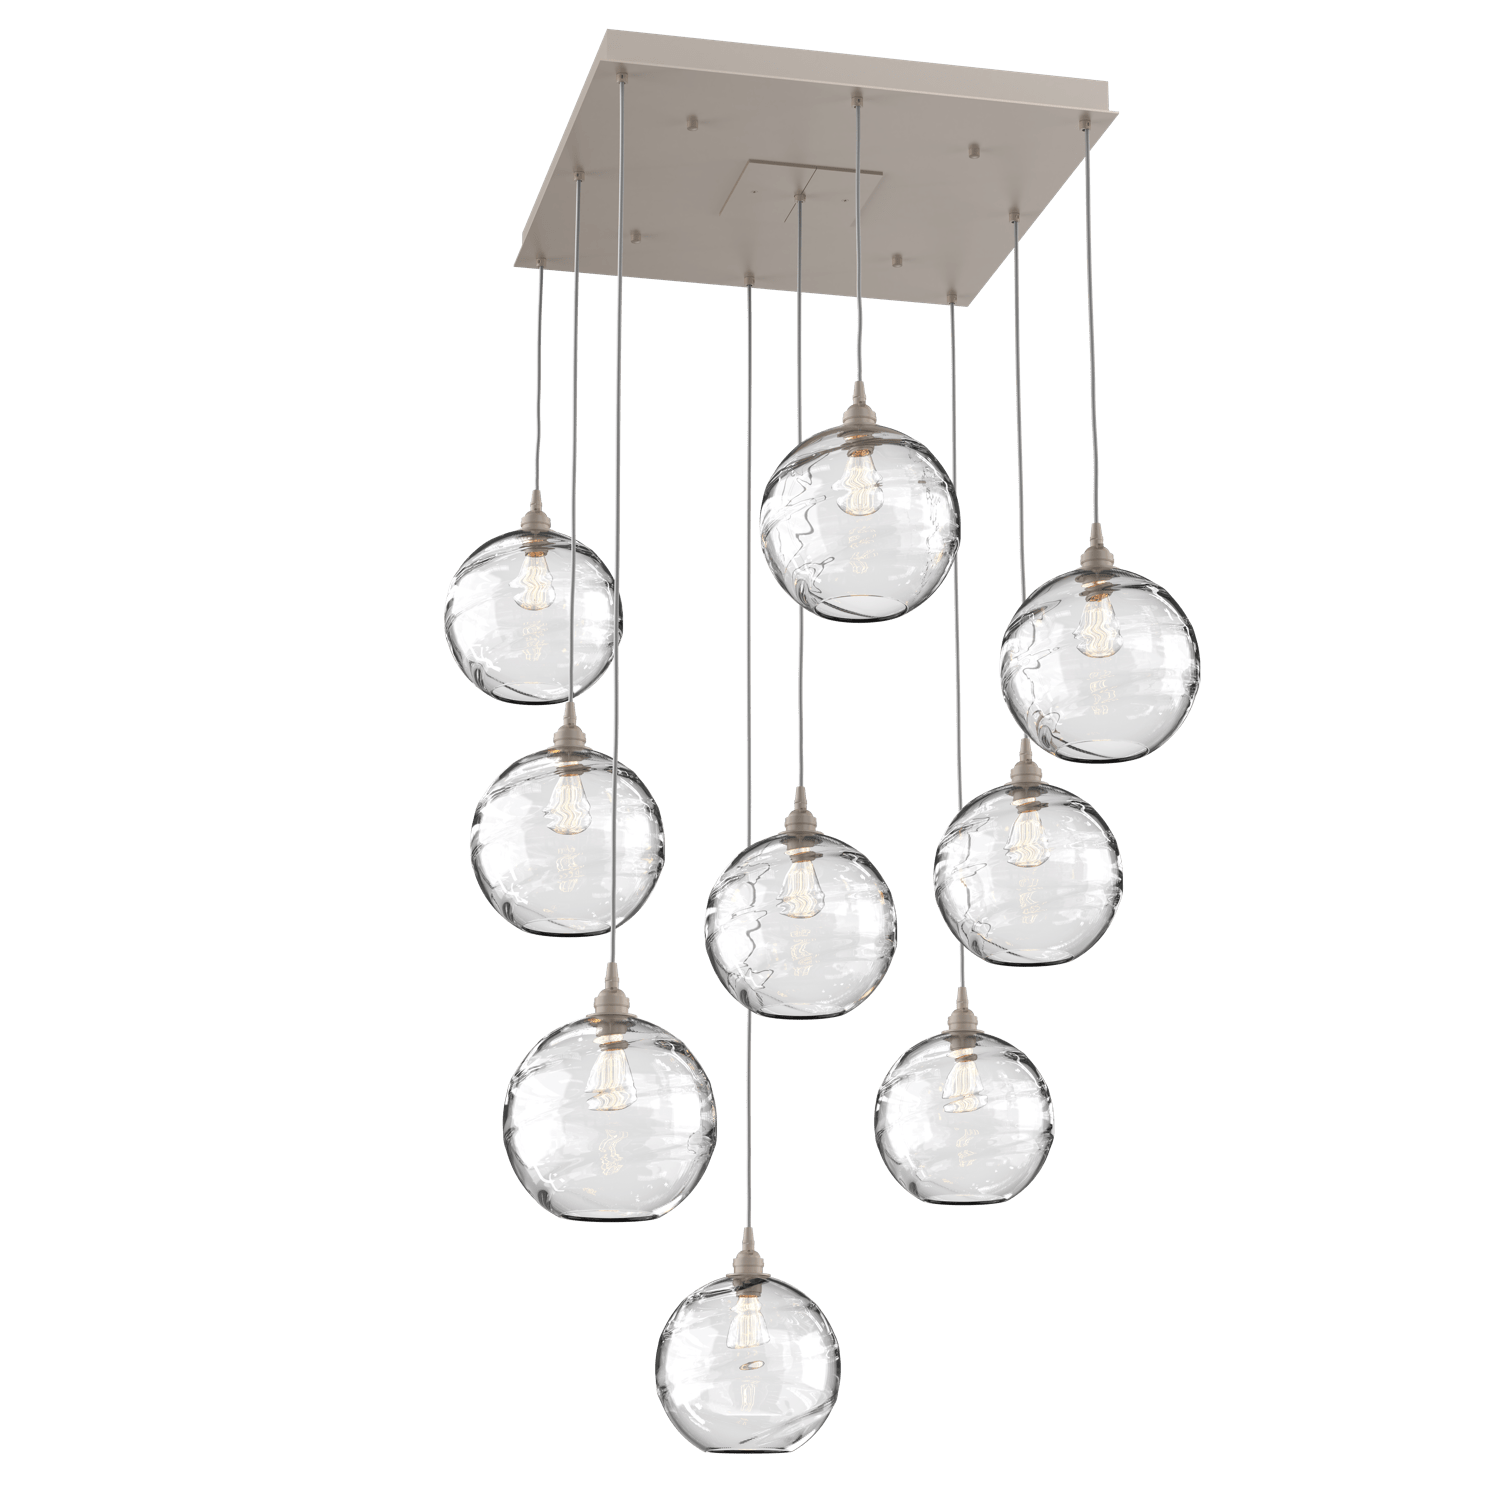 CHB0047-09-BS-OC-Hammerton-Studio-Optic-Blown-Glass-Terra-9-light-square-pendant-chandelier-with-metallic-beige-silver-finish-and-optic-clear-blown-glass-shades-and-incandescent-lamping